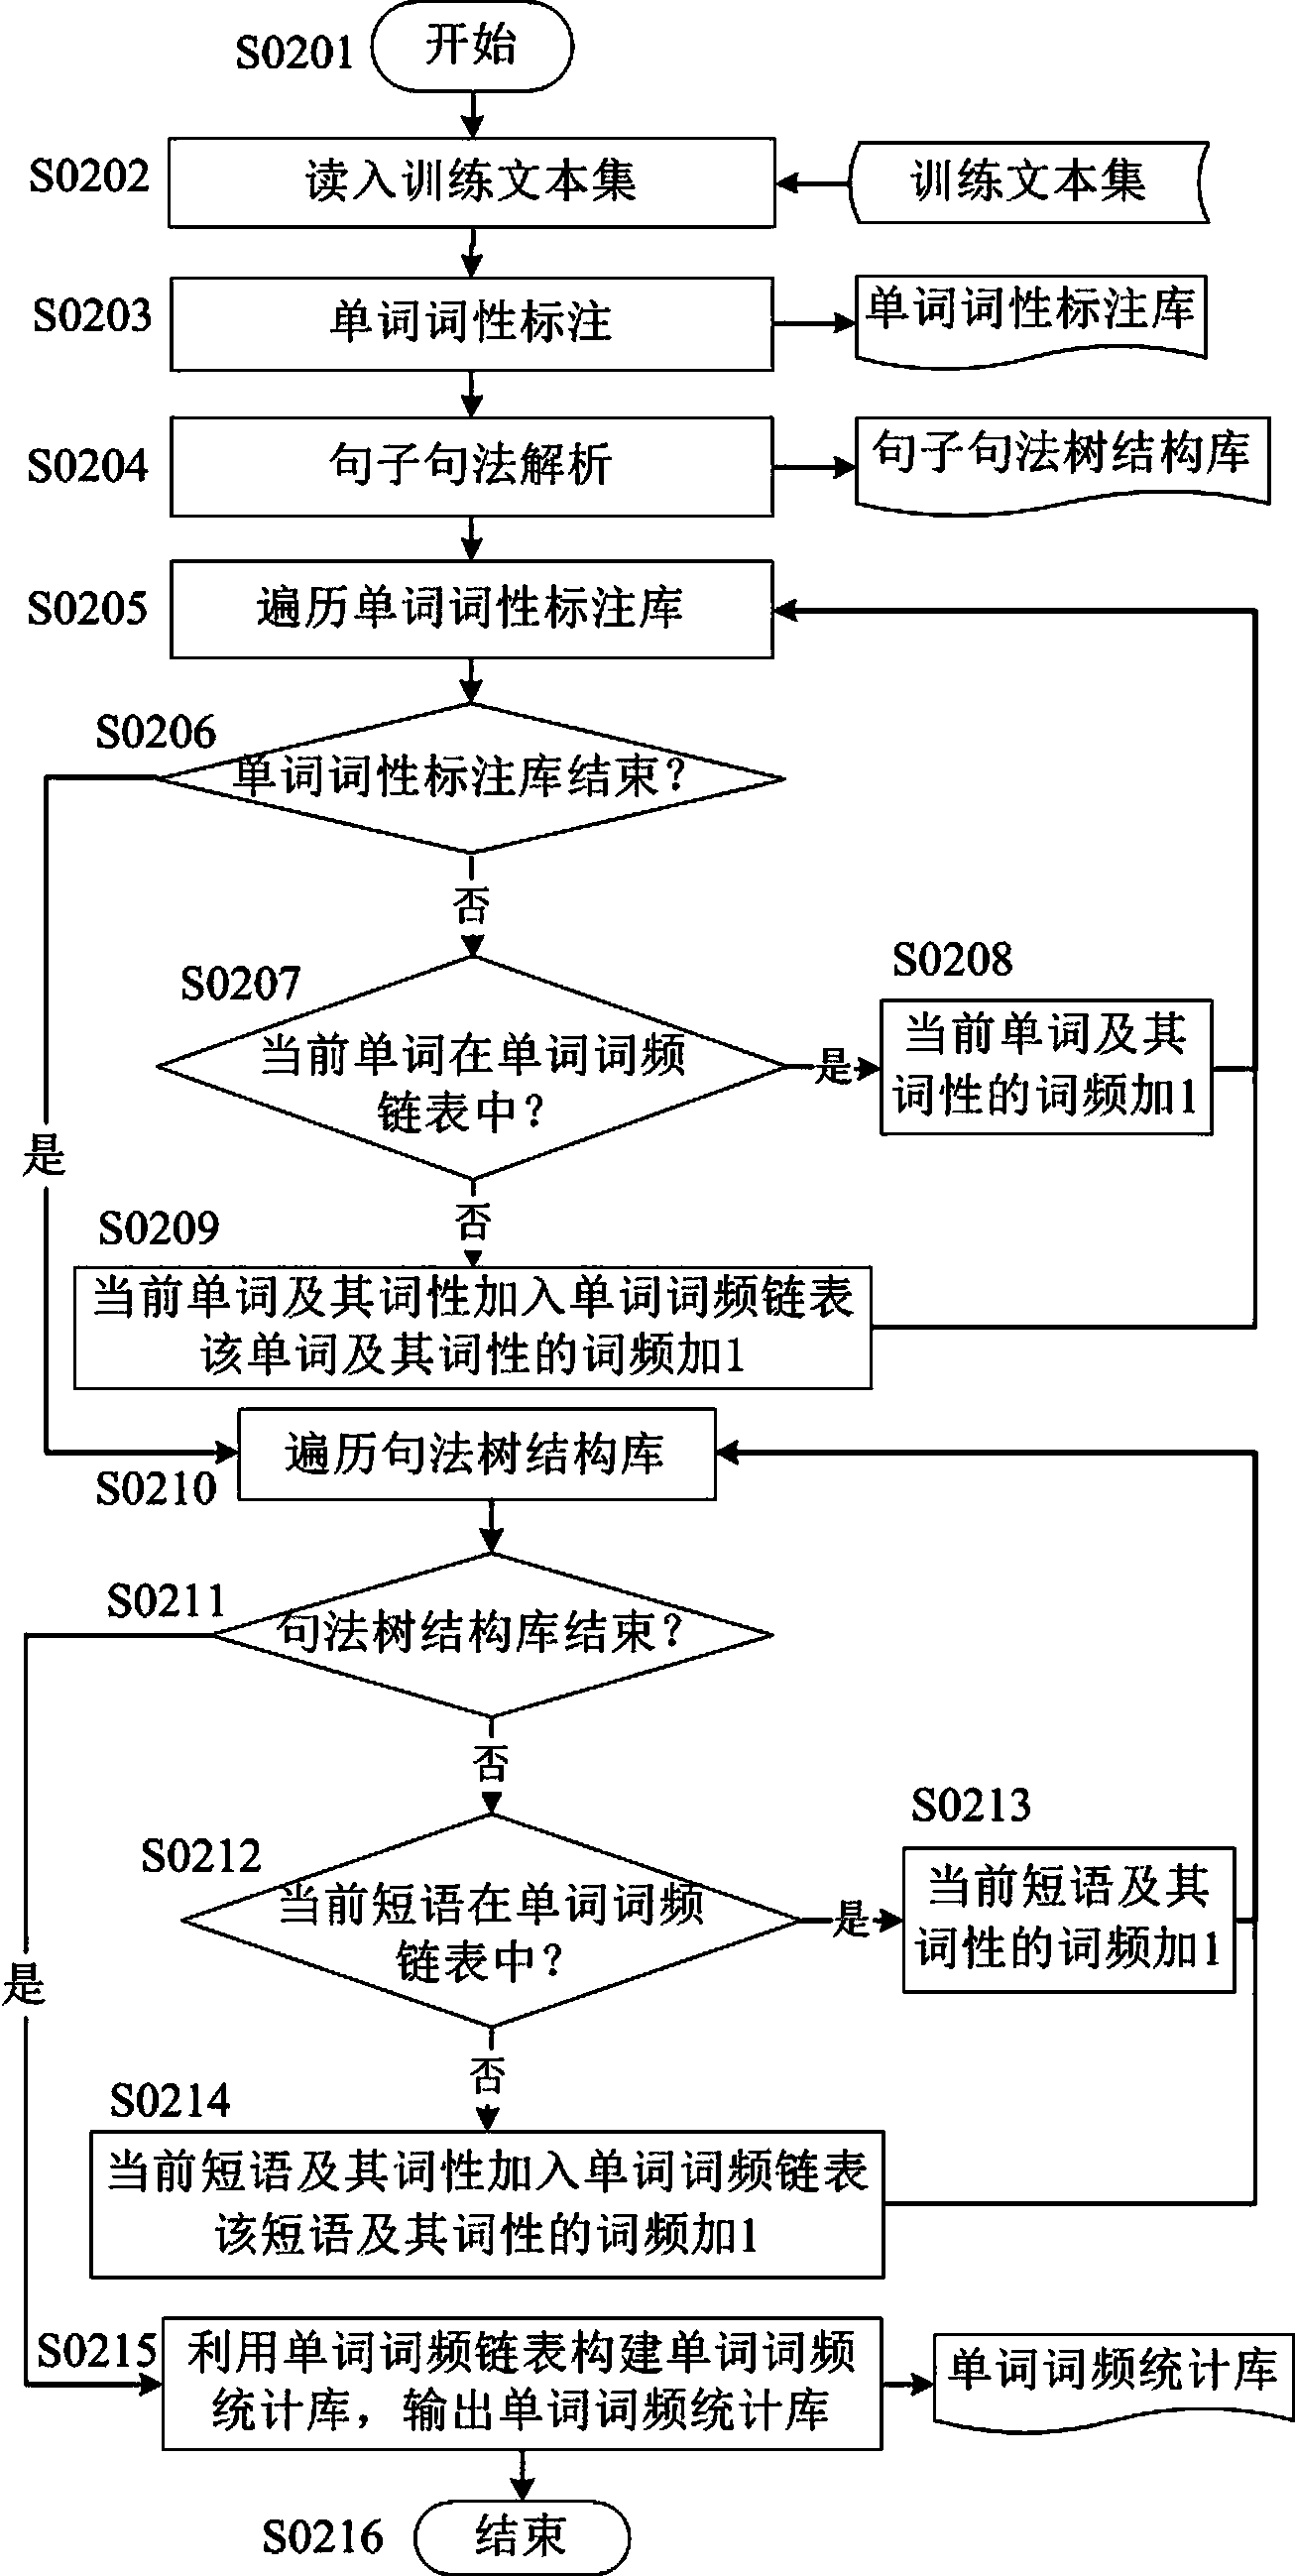 Method for automatically correcting syntax errors in English composition based on multivariate features